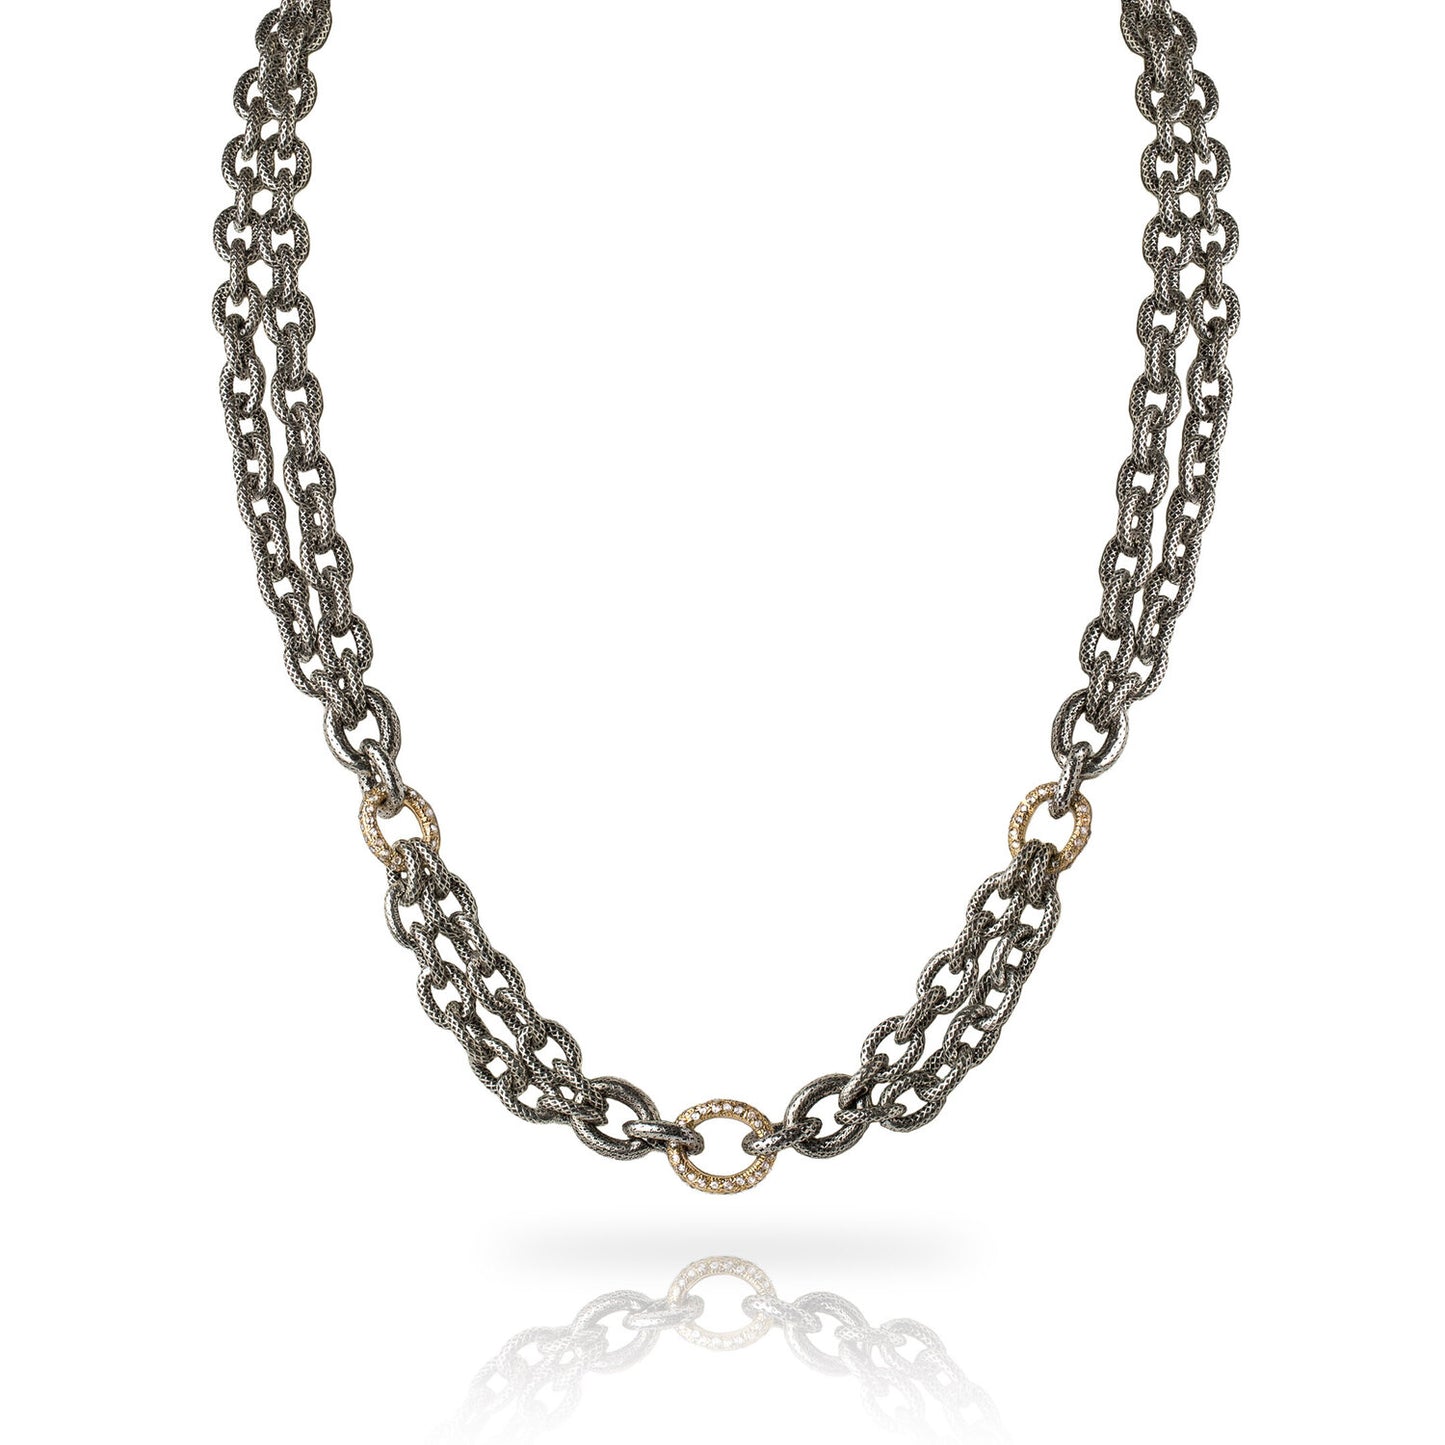 A trio of diamond pavé links are interspersed between a double-strand of our exclusive textured and oxidized chain in this casual and contemporary chain link necklace.  Diamond pavé link is available in 14k yellow gold, 14k rose gold, or sterling silver  Adjustable length between 16 to 18 inches  Includes a Liza Beth signature satin finish clasp and extender  Made in USA